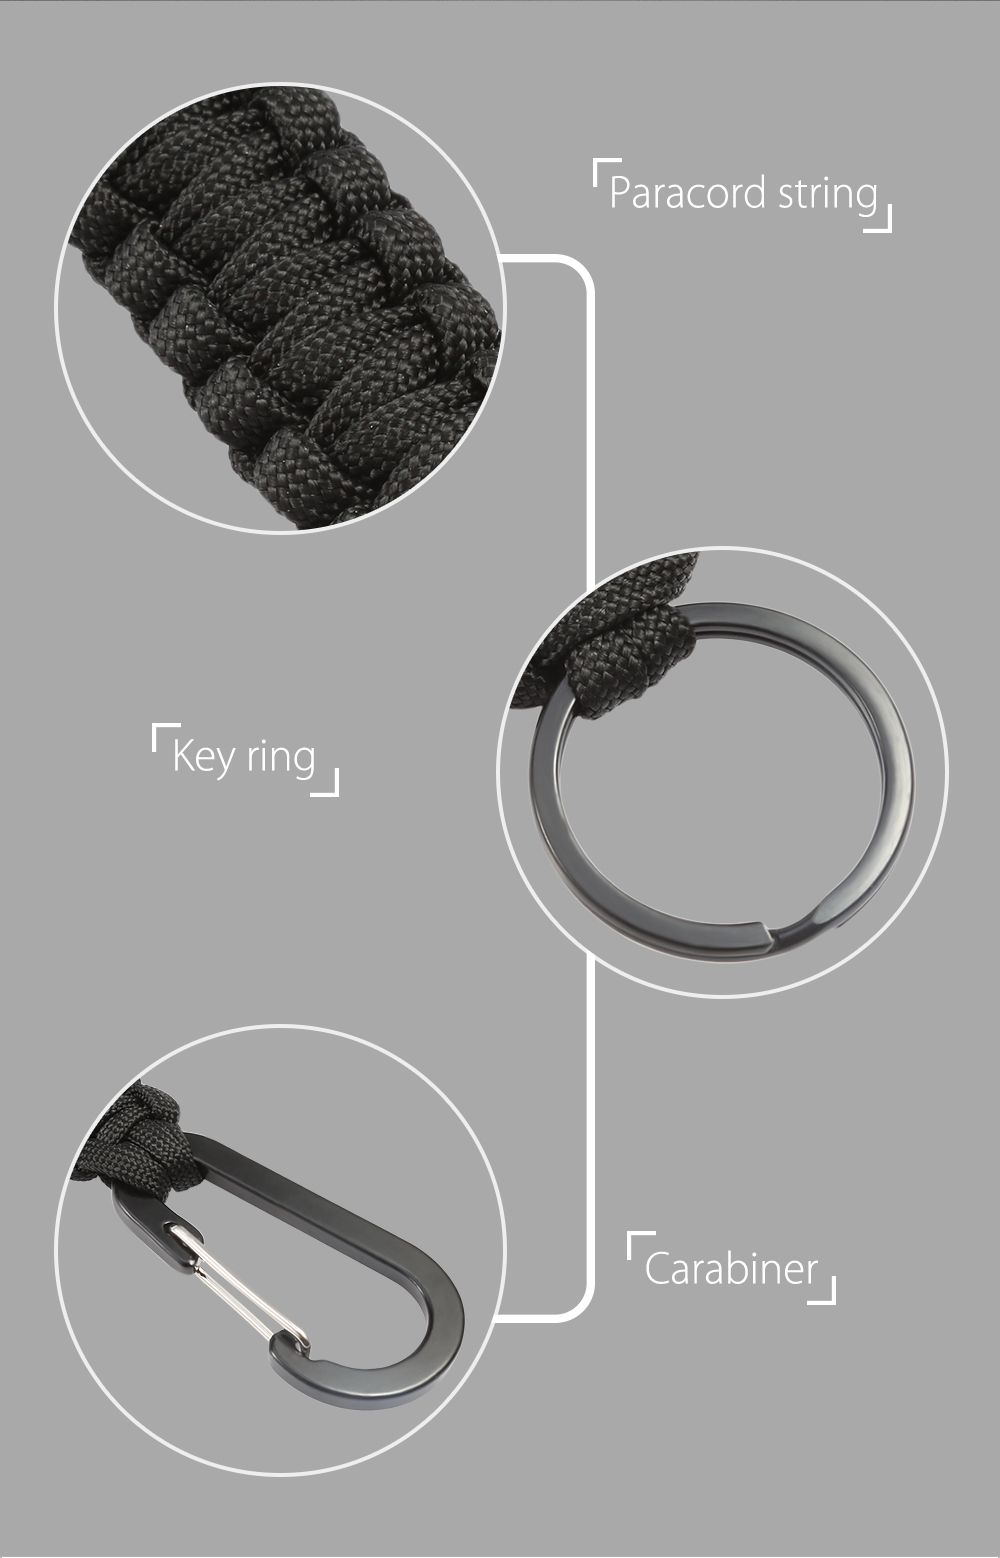 Multifunctional Knitted Emergency Survival Paracord Bracelet with Carabiner Key Ring